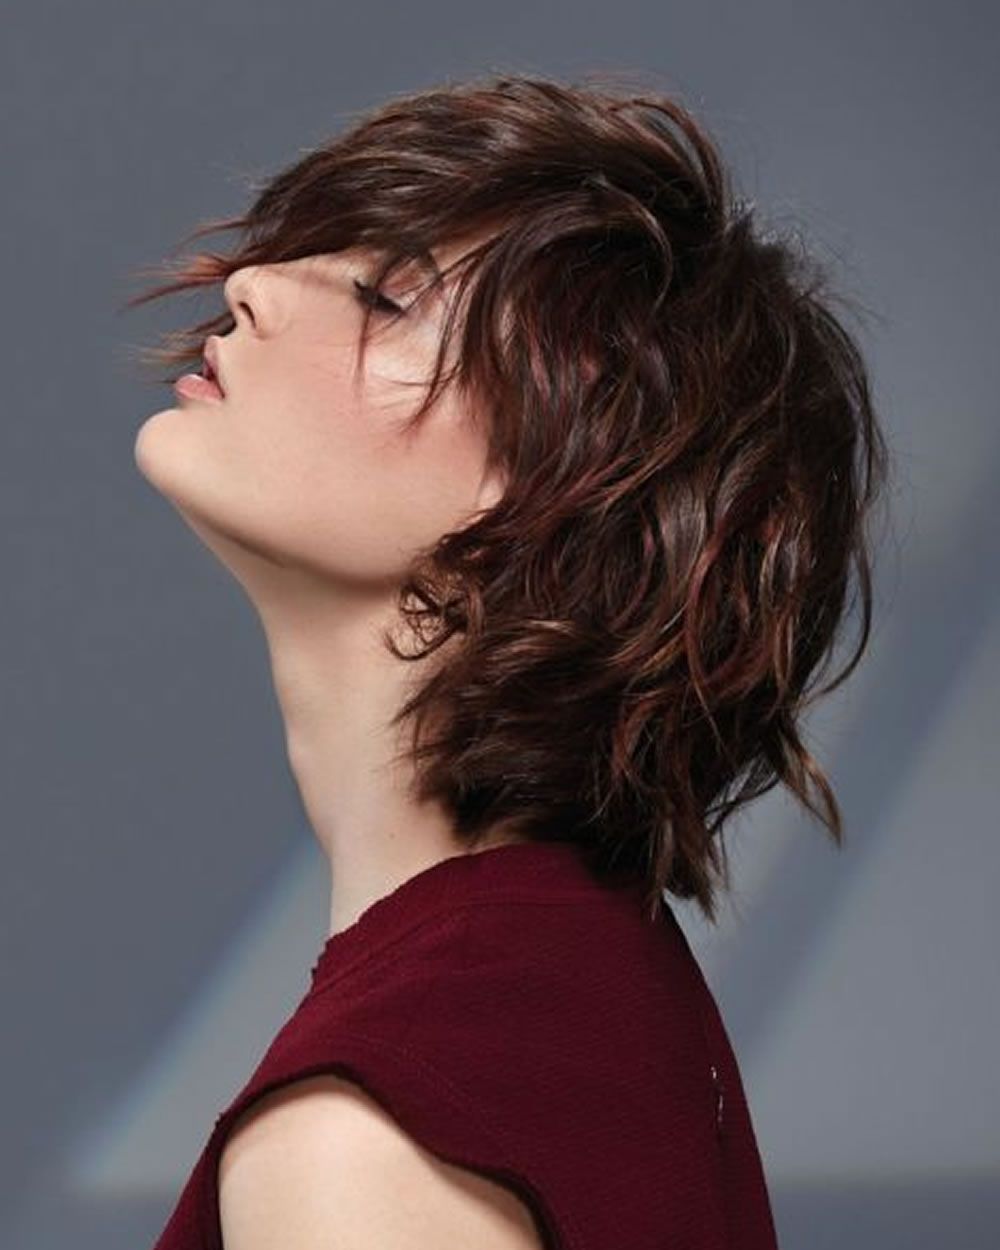 Hair Cuts : Bob Haircuts For Round Faces And Fine Hair Thick Female Intended For Short Haircuts With Bangs For Round Faces (View 21 of 25)